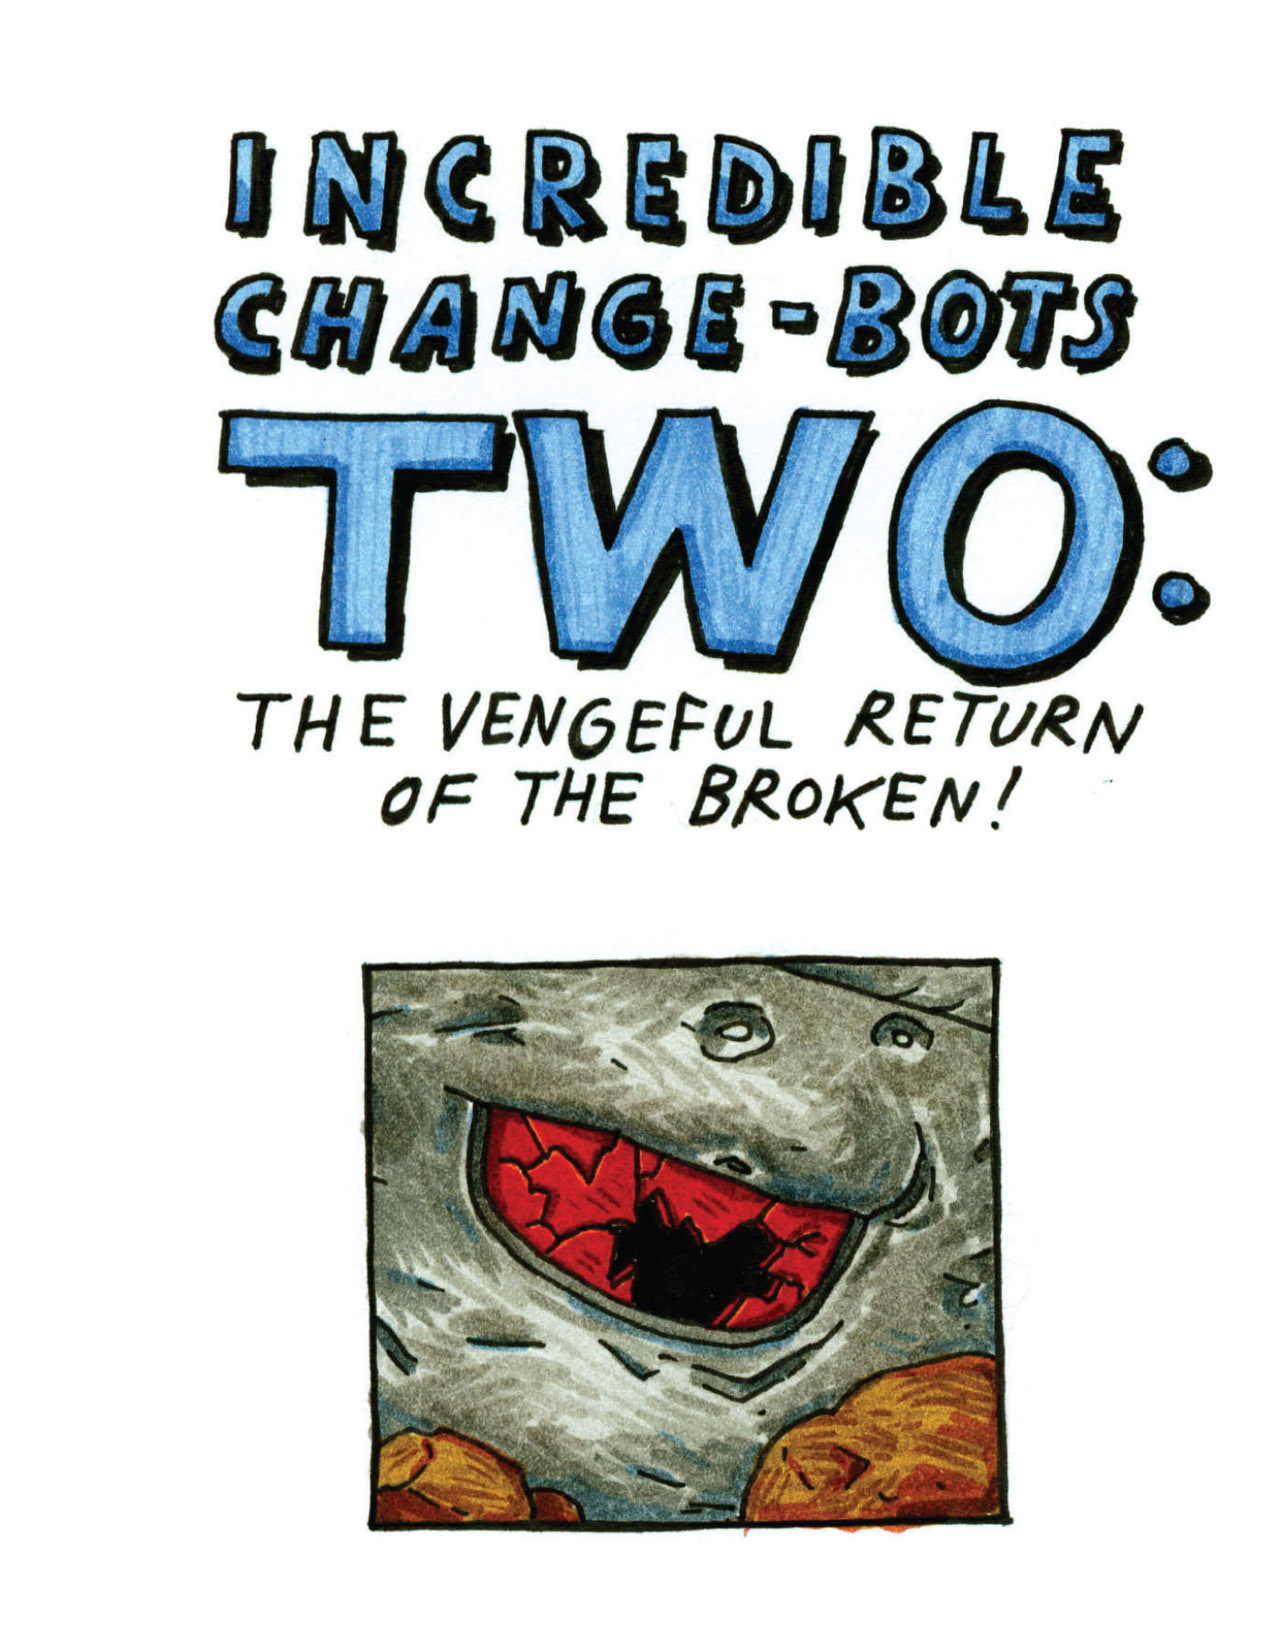 Read online Incredible Change-Bots comic -  Issue # TPB 2 - 6